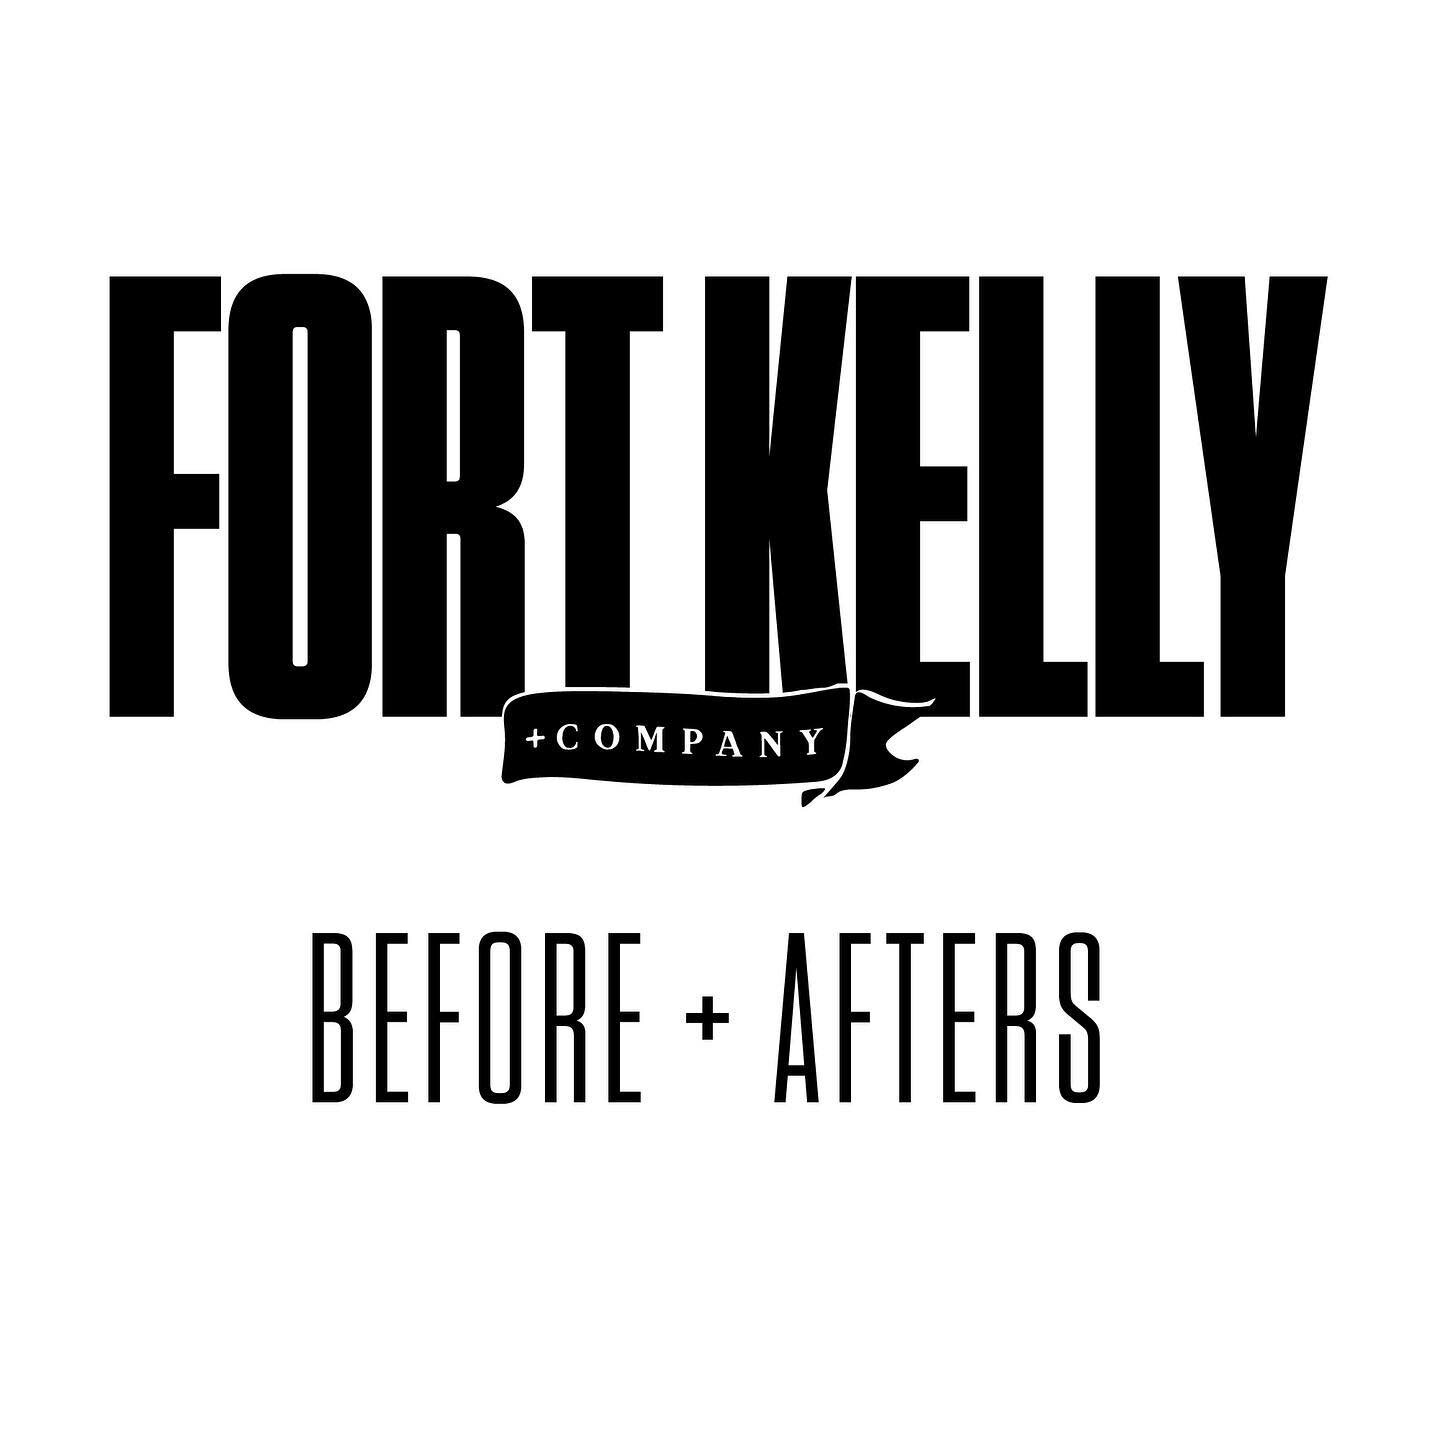 We enjoyed the full renovation that we did with this home. Check out that kitchen / dining update!
.
.
.

#fortkellyandco #fortkelly #buildit #tools #craftsman #milwaukeetools #toolsofthetrade #milwaukee #demoday #homerenovations #contractor #fixerup